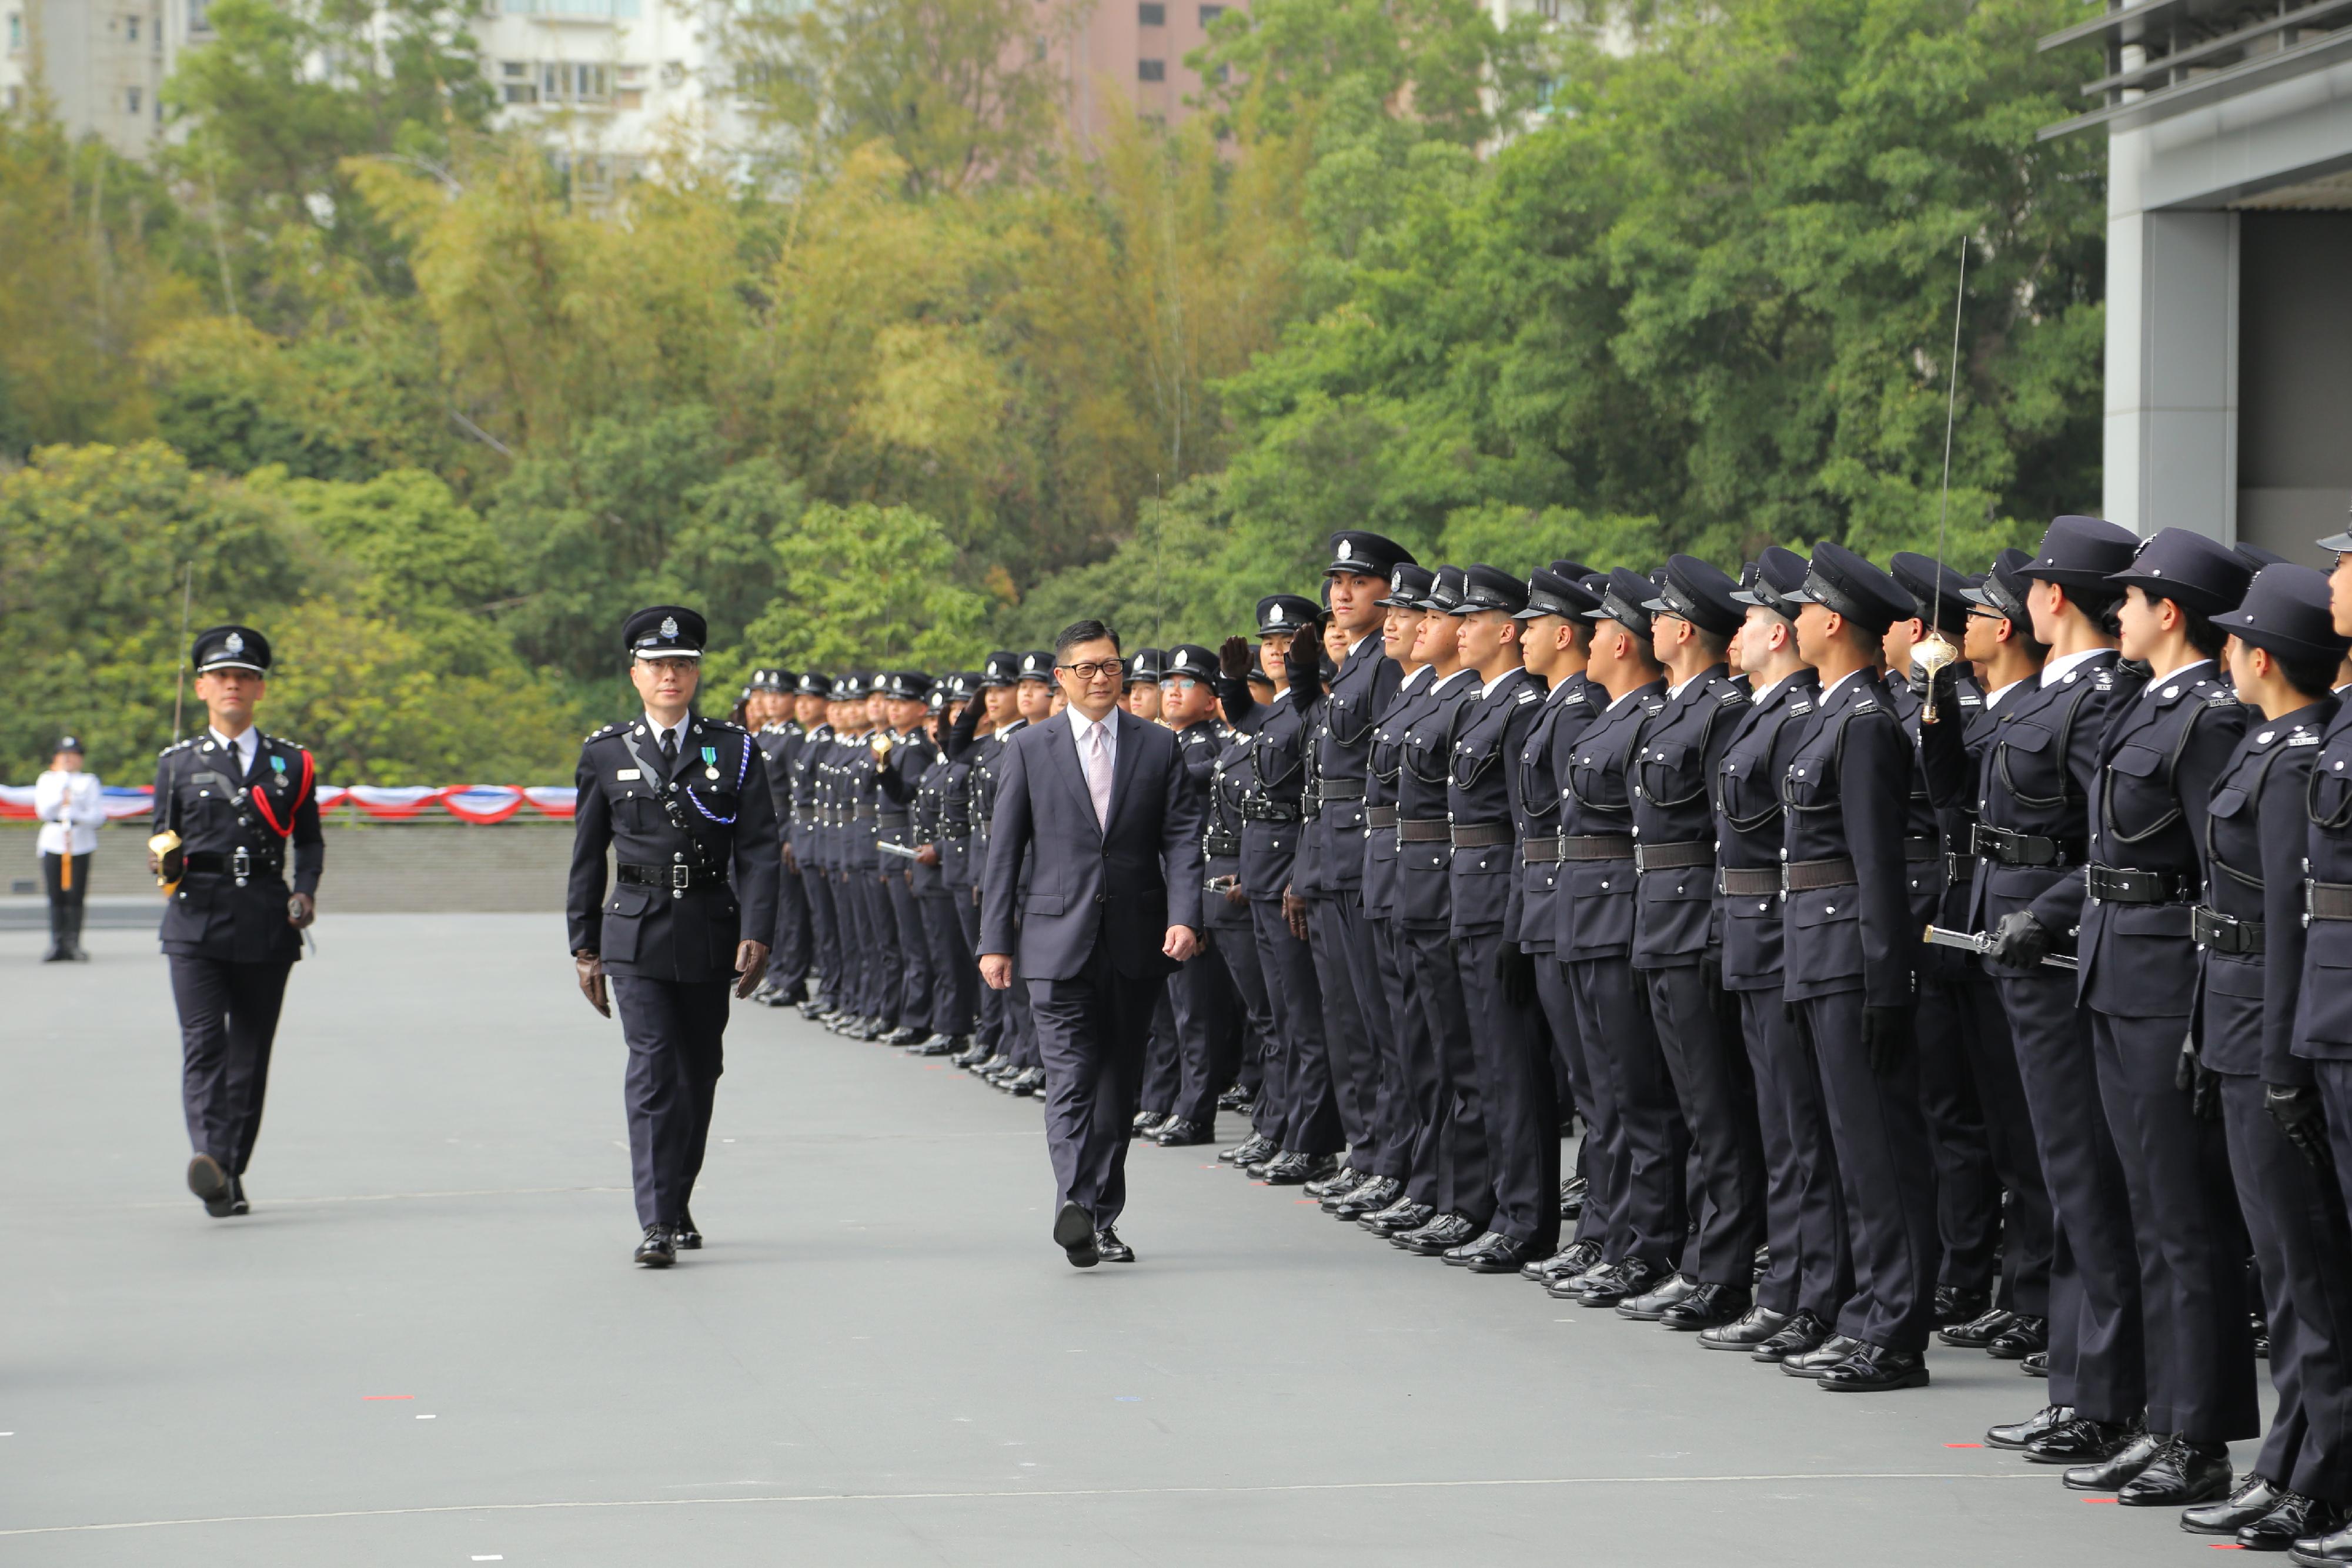 The Secretary for Security, Mr Tang Ping-keung, inspects a contingent of graduates at the Immigration Service Institute of Training and Development Passing-out Parade today (March 15).